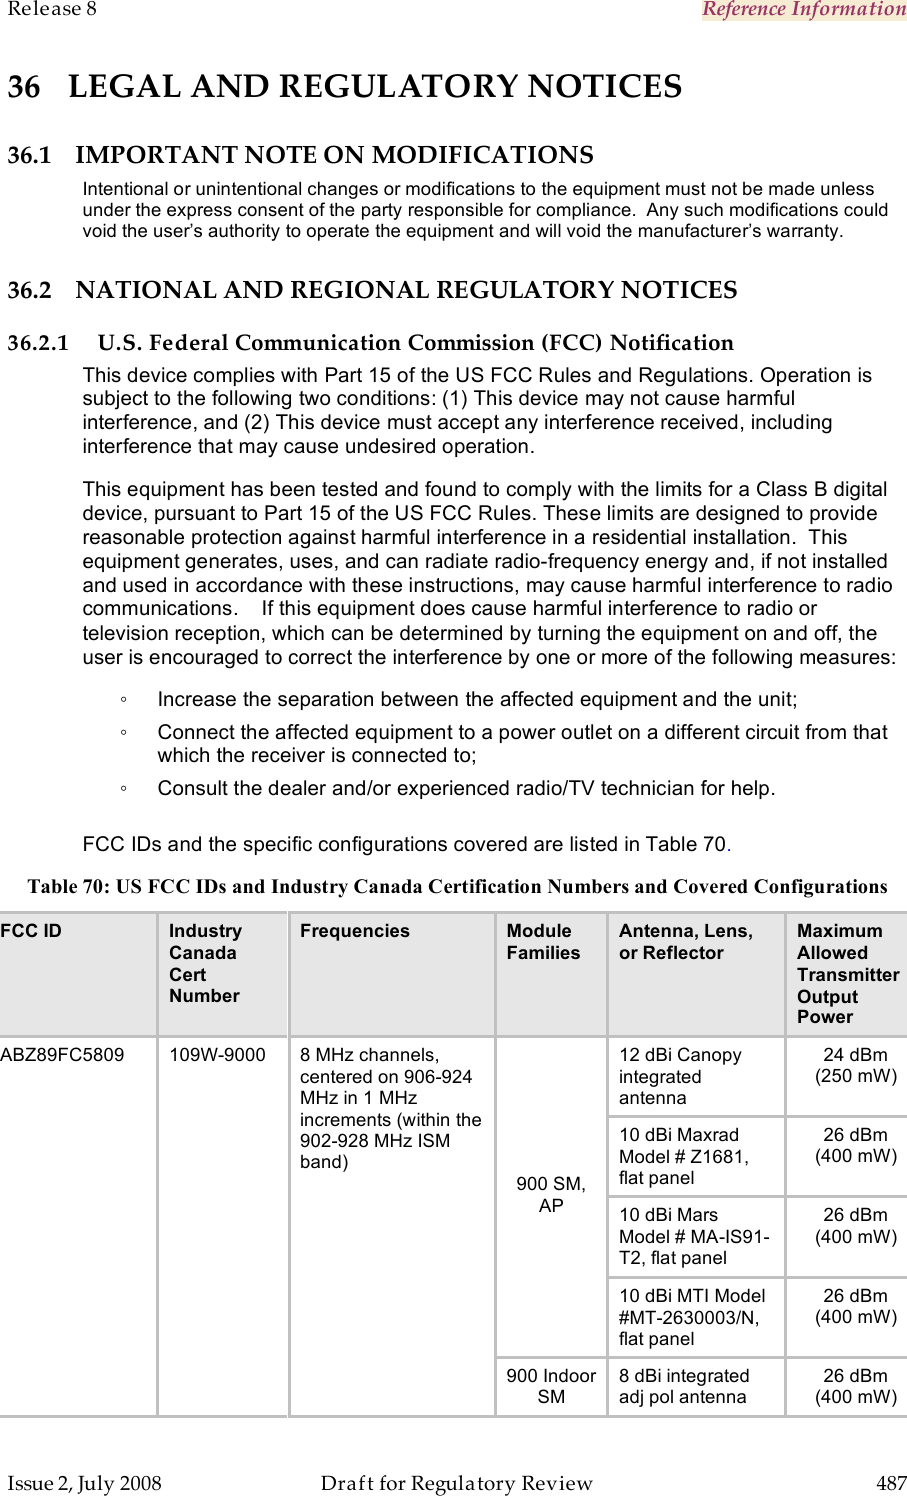 Release 8    Reference Information   Issue 2, July 2008  Draft for Regulatory Review  487   36 LEGAL AND REGULATORY NOTICES 36.1 IMPORTANT NOTE ON MODIFICATIONS Intentional or unintentional changes or modifications to the equipment must not be made unless under the express consent of the party responsible for compliance.  Any such modifications could void the user’s authority to operate the equipment and will void the manufacturer’s warranty. 36.2 NATIONAL AND REGIONAL REGULATORY NOTICES 36.2.1 U.S. Federal Communication Commission (FCC) Notification This device complies with Part 15 of the US FCC Rules and Regulations. Operation is subject to the following two conditions: (1) This device may not cause harmful interference, and (2) This device must accept any interference received, including interference that may cause undesired operation. This equipment has been tested and found to comply with the limits for a Class B digital device, pursuant to Part 15 of the US FCC Rules. These limits are designed to provide reasonable protection against harmful interference in a residential installation.  This equipment generates, uses, and can radiate radio-frequency energy and, if not installed and used in accordance with these instructions, may cause harmful interference to radio communications.    If this equipment does cause harmful interference to radio or television reception, which can be determined by turning the equipment on and off, the user is encouraged to correct the interference by one or more of the following measures: ◦  Increase the separation between the affected equipment and the unit; ◦  Connect the affected equipment to a power outlet on a different circuit from that which the receiver is connected to; ◦  Consult the dealer and/or experienced radio/TV technician for help.  FCC IDs and the specific configurations covered are listed in Table 70. Table 70: US FCC IDs and Industry Canada Certification Numbers and Covered Configurations FCC ID Industry Canada Cert Number Frequencies Module Families Antenna, Lens,  or Reflector Maximum Allowed Transmitter Output Power 12 dBi Canopy integrated antenna  24 dBm (250 mW) 10 dBi Maxrad Model # Z1681, flat panel  26 dBm (400 mW) 10 dBi Mars Model # MA-IS91-T2, flat panel  26 dBm (400 mW) 900 SM, AP 10 dBi MTI Model #MT-2630003/N, flat panel 26 dBm (400 mW) ABZ89FC5809 109W-9000 8 MHz channels, centered on 906-924 MHz in 1 MHz increments (within the 902-928 MHz ISM band) 900 Indoor SM 8 dBi integrated adj pol antenna 26 dBm (400 mW) 